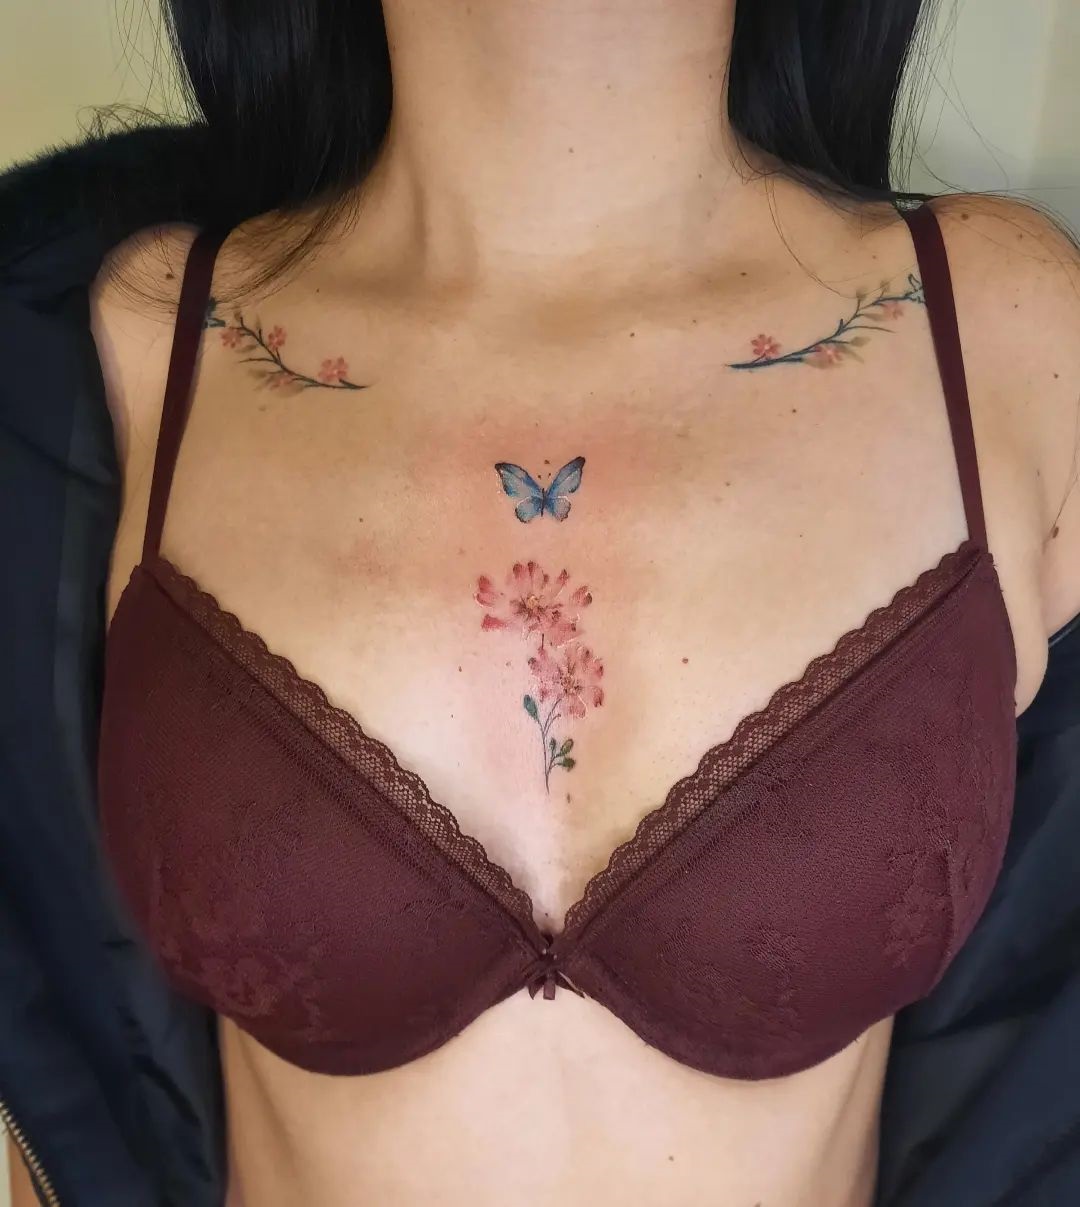 50 Best Chest Tattoos For Women in 2023  Tattoos for women Petite tattoos  Tattoos for women small